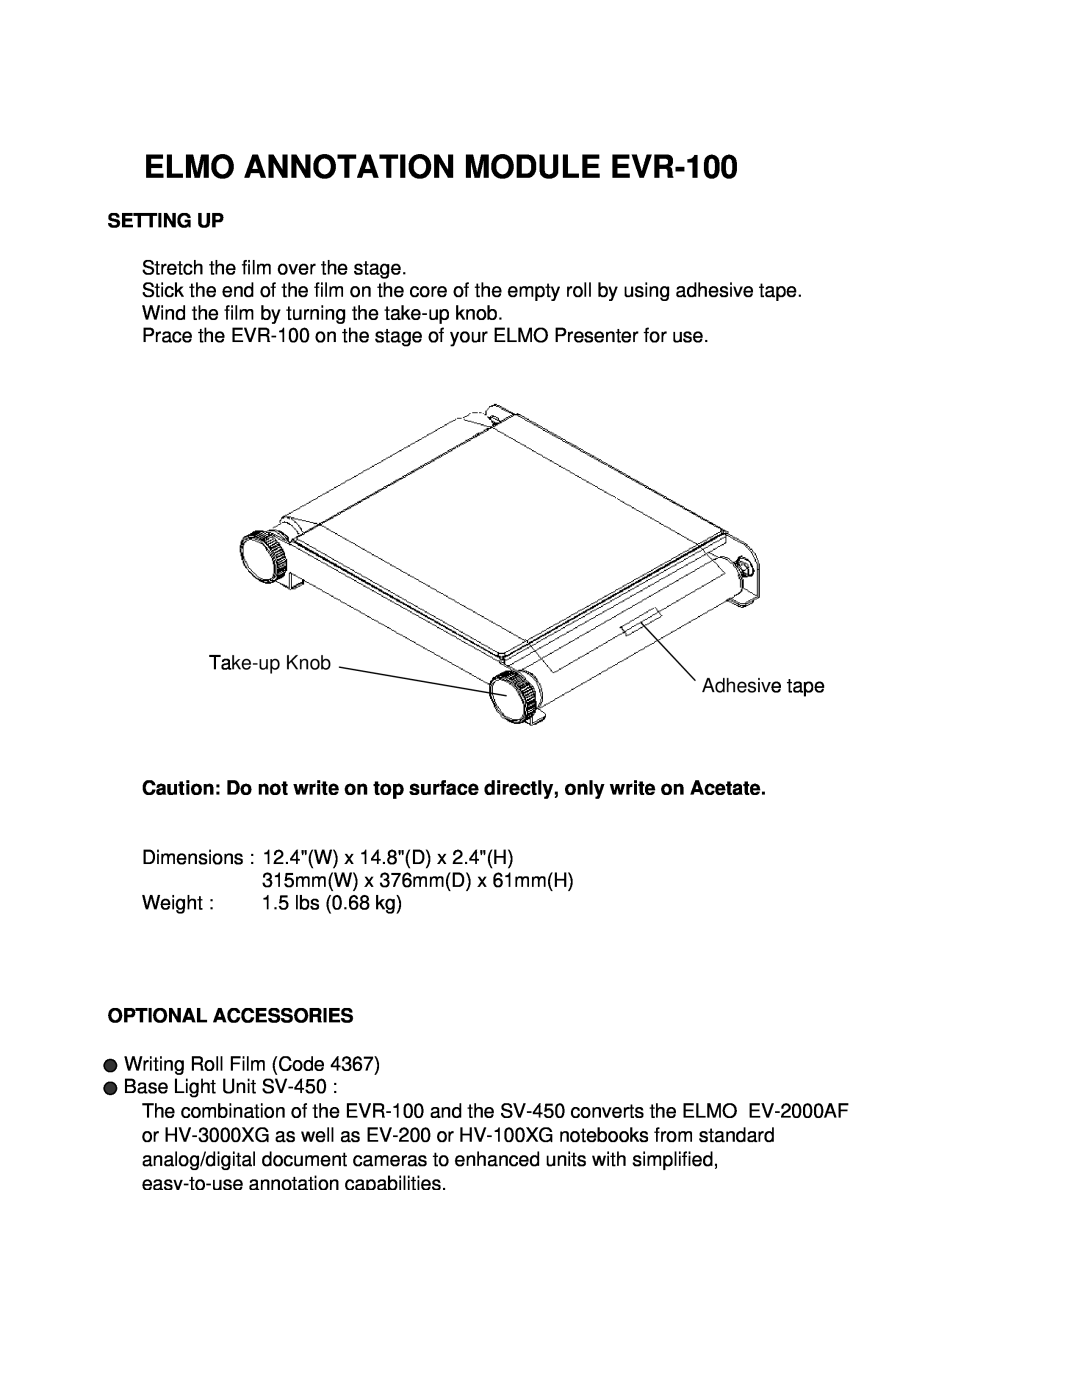 Elmo dimensions ELMO ANNOTATION MODULE EVR-100, Setting Up, Optional Accessories 